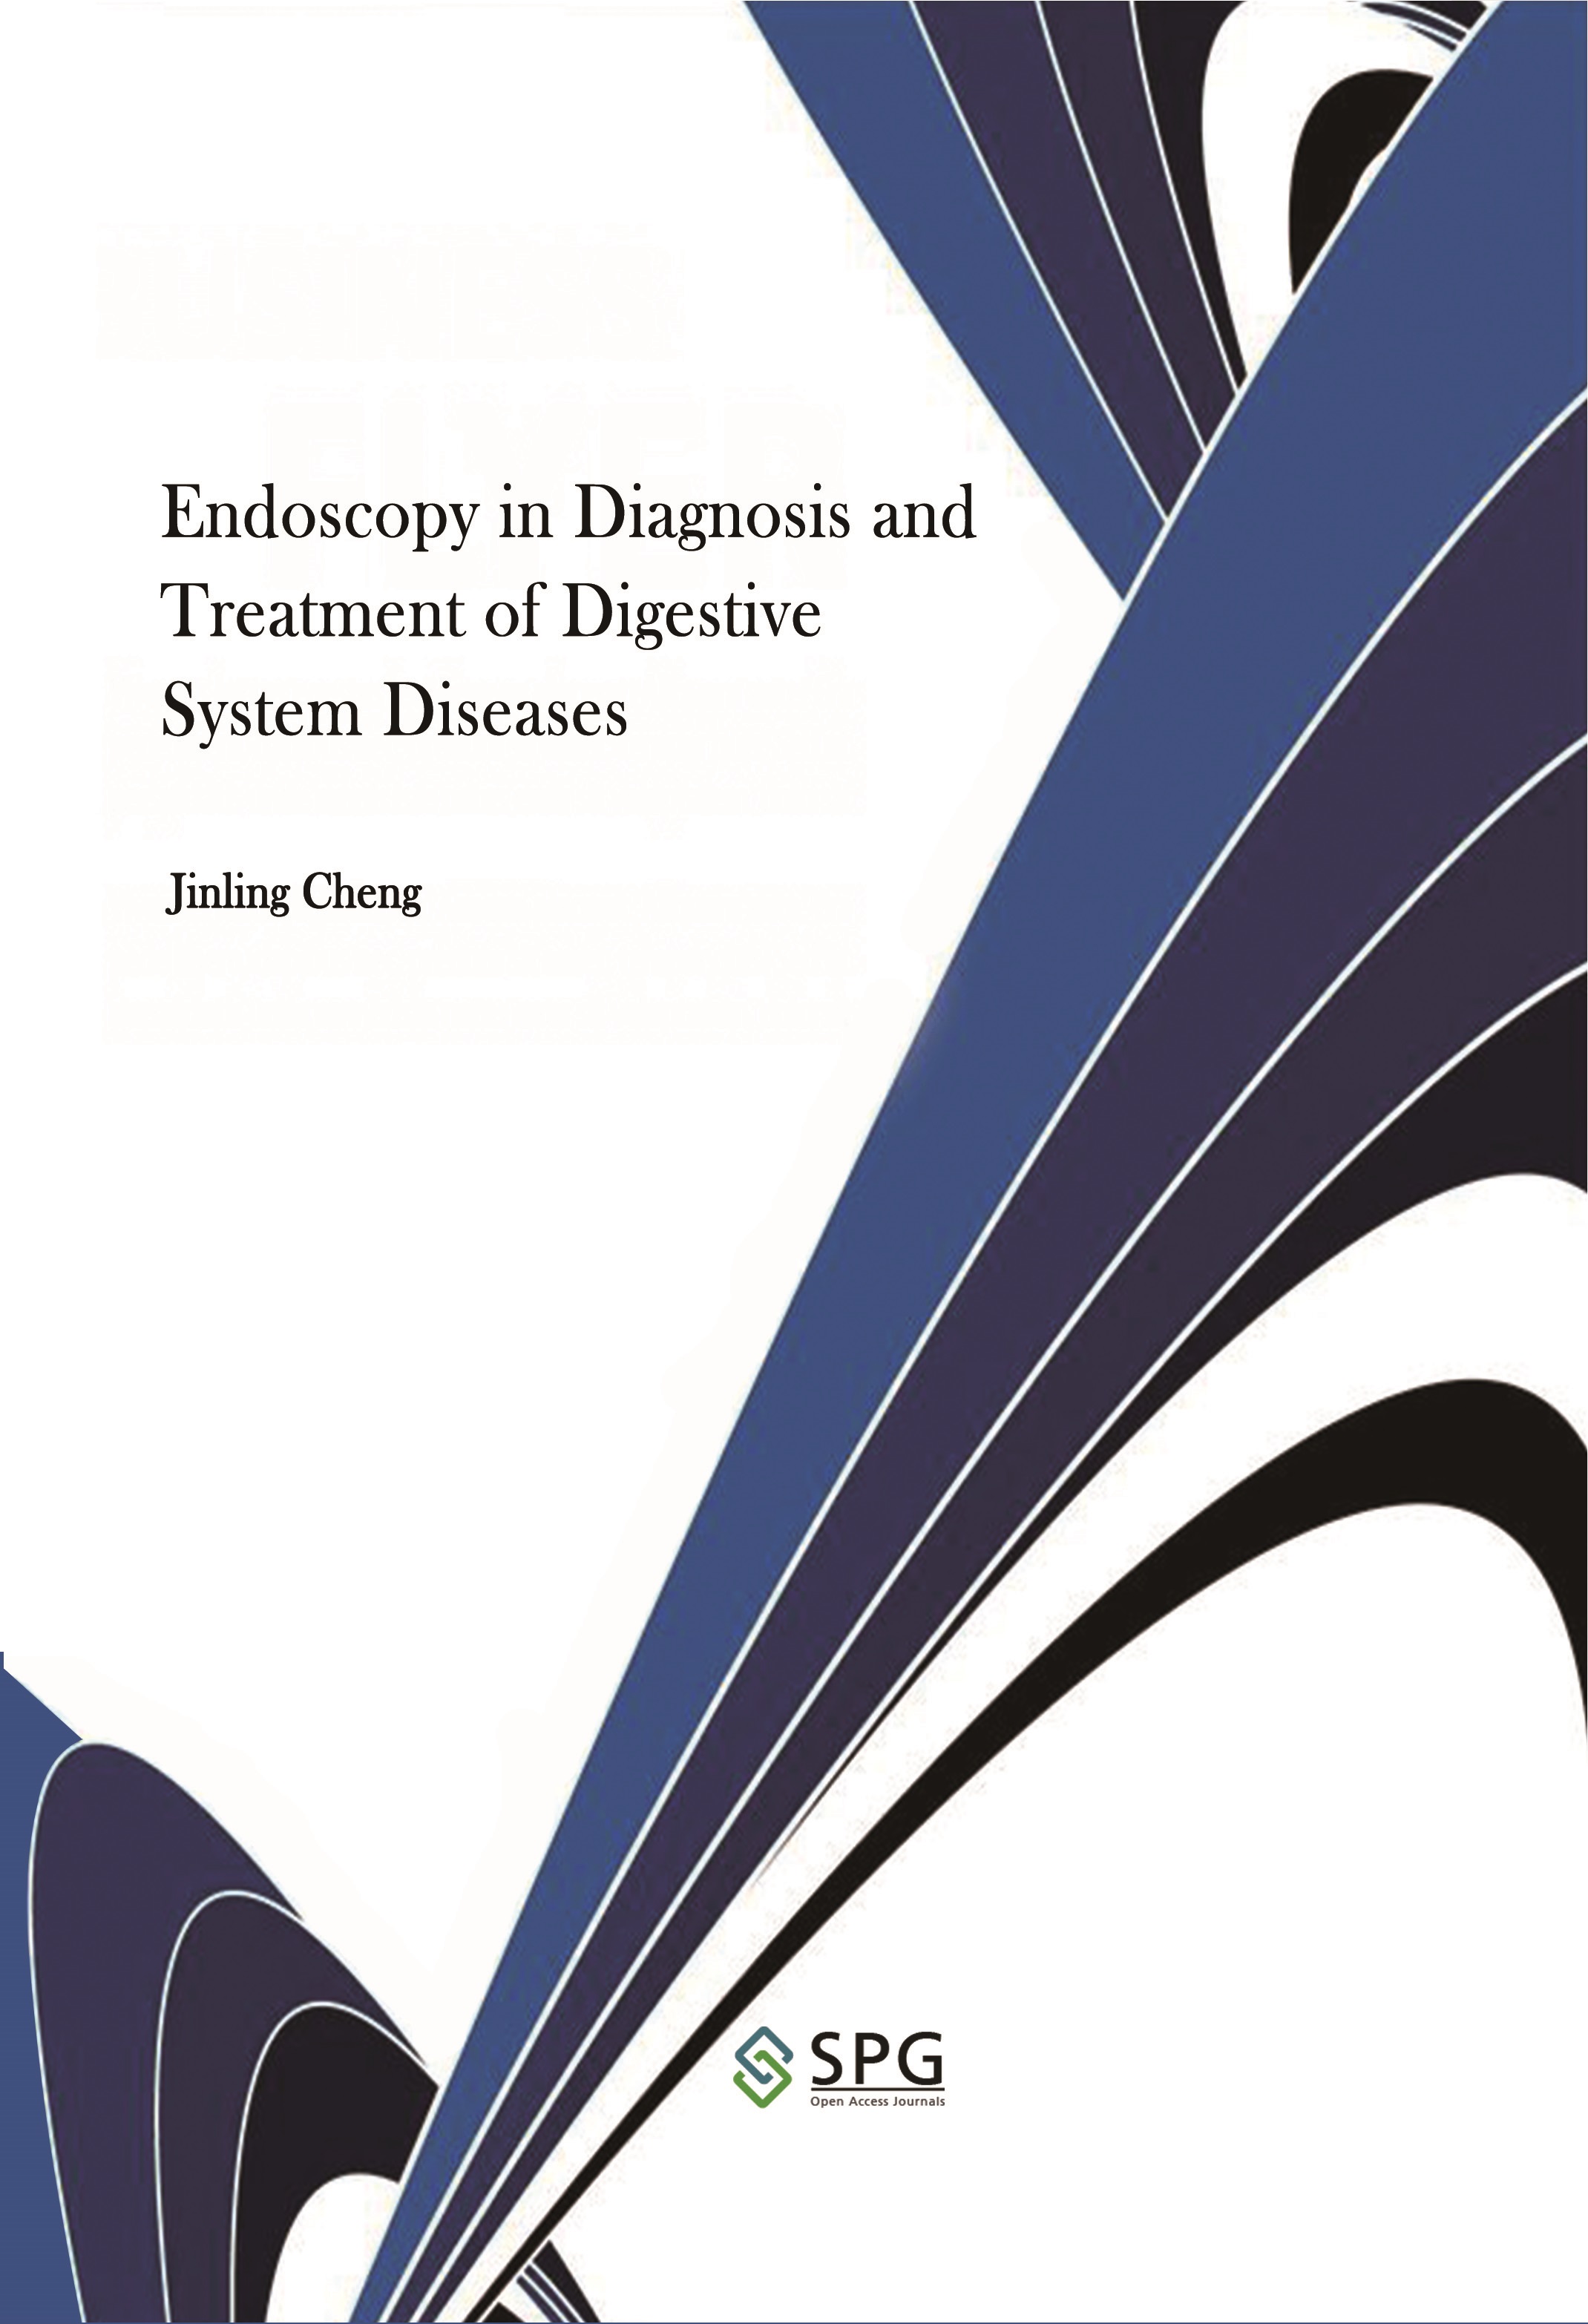 Endoscopy in Diagnosis and Treatment of Digestive System Diseases | Scholar Publishing Group